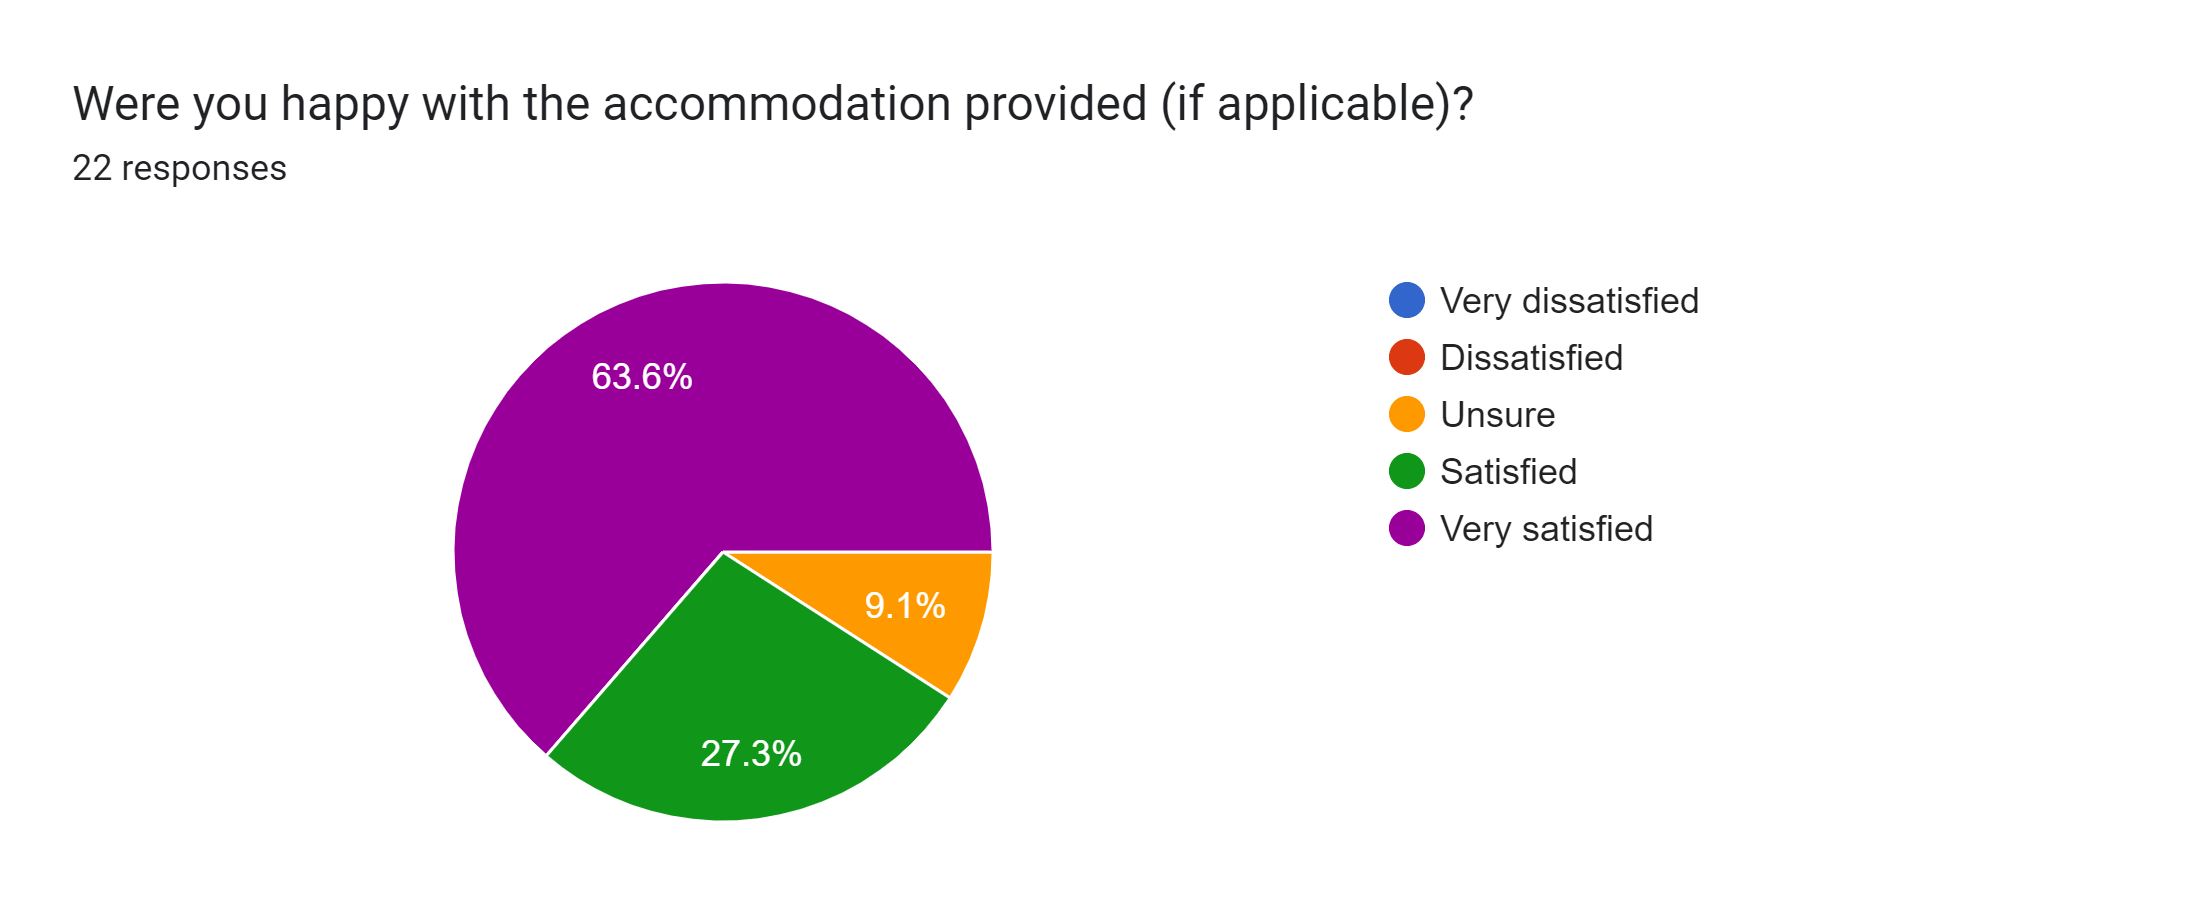 Forms response chart. Question title: Were you happy with the accommodation provided (if applicable)?. Number of responses: 22 responses.